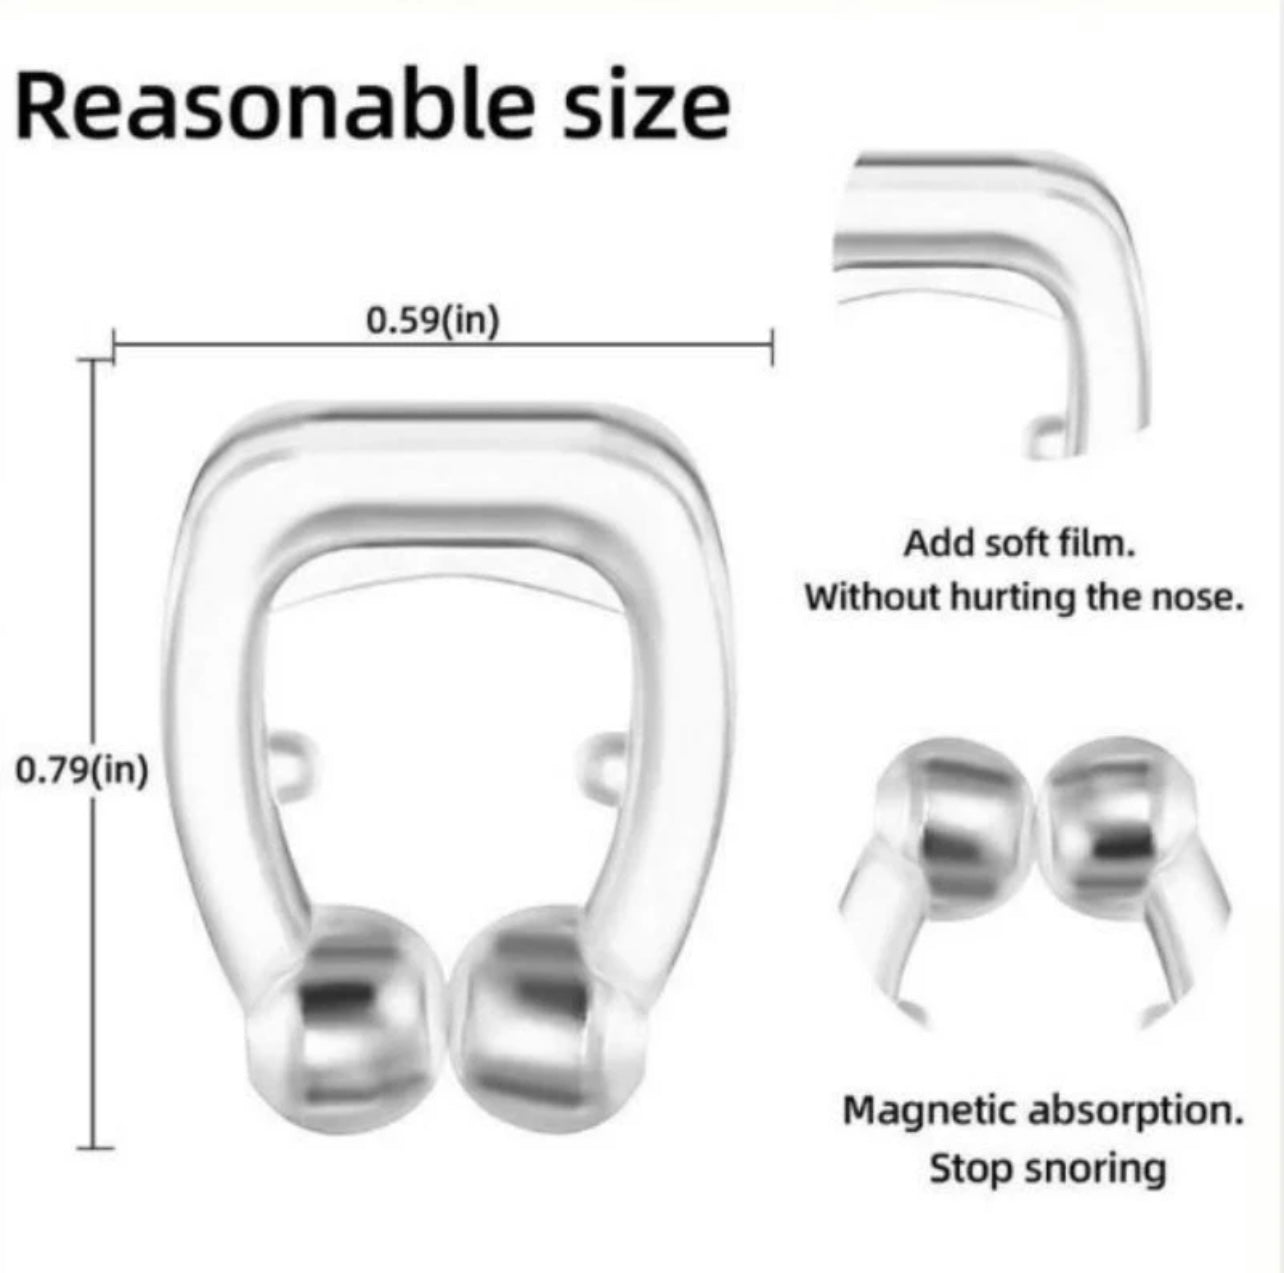 Anti Snore - Stop Snoring Nose Clip